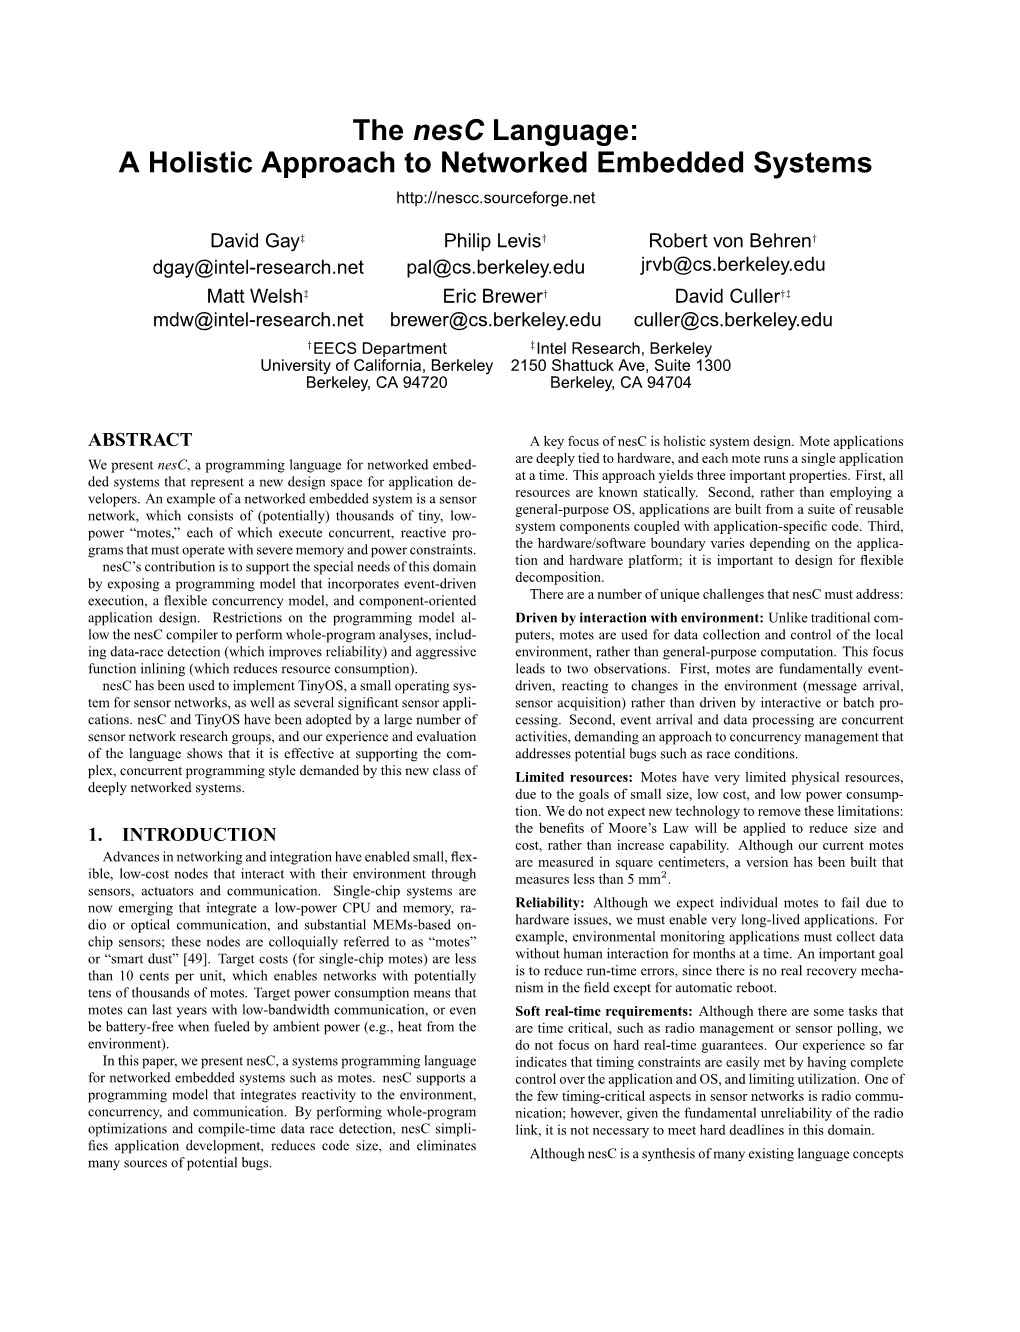 The Nesc Language: a Holistic Approach to Networked Embedded Systems